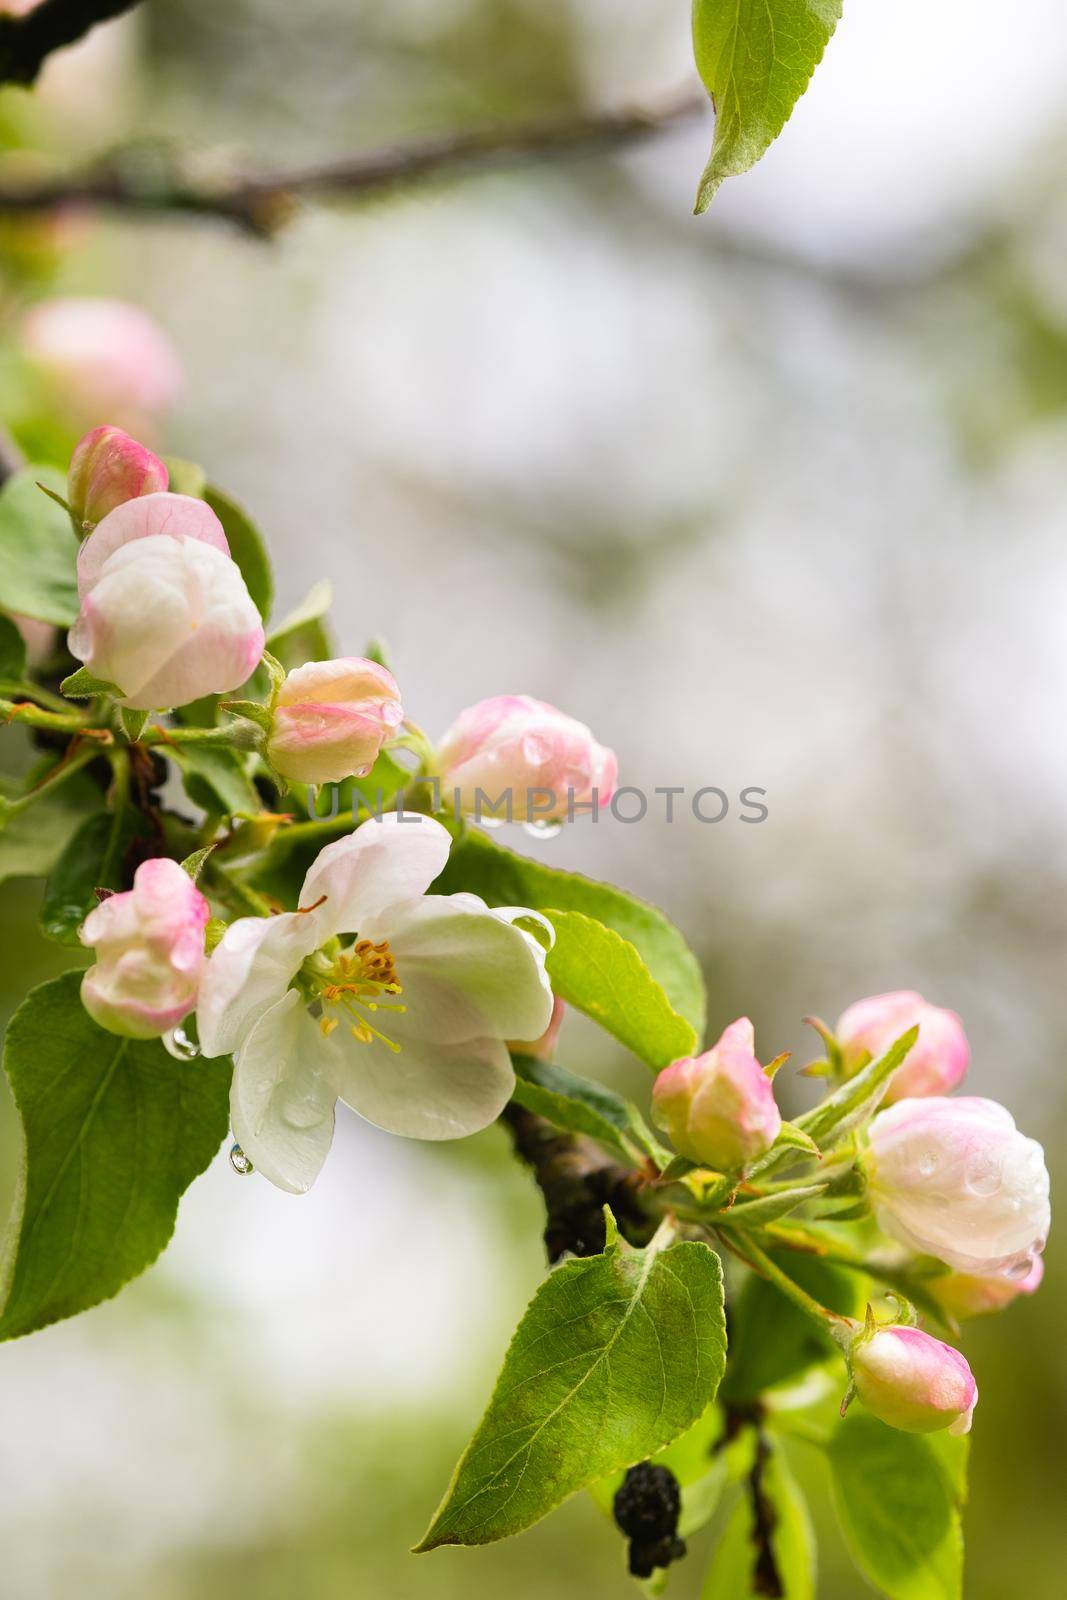 Blooming apple tree in spring after rain by Lobachad